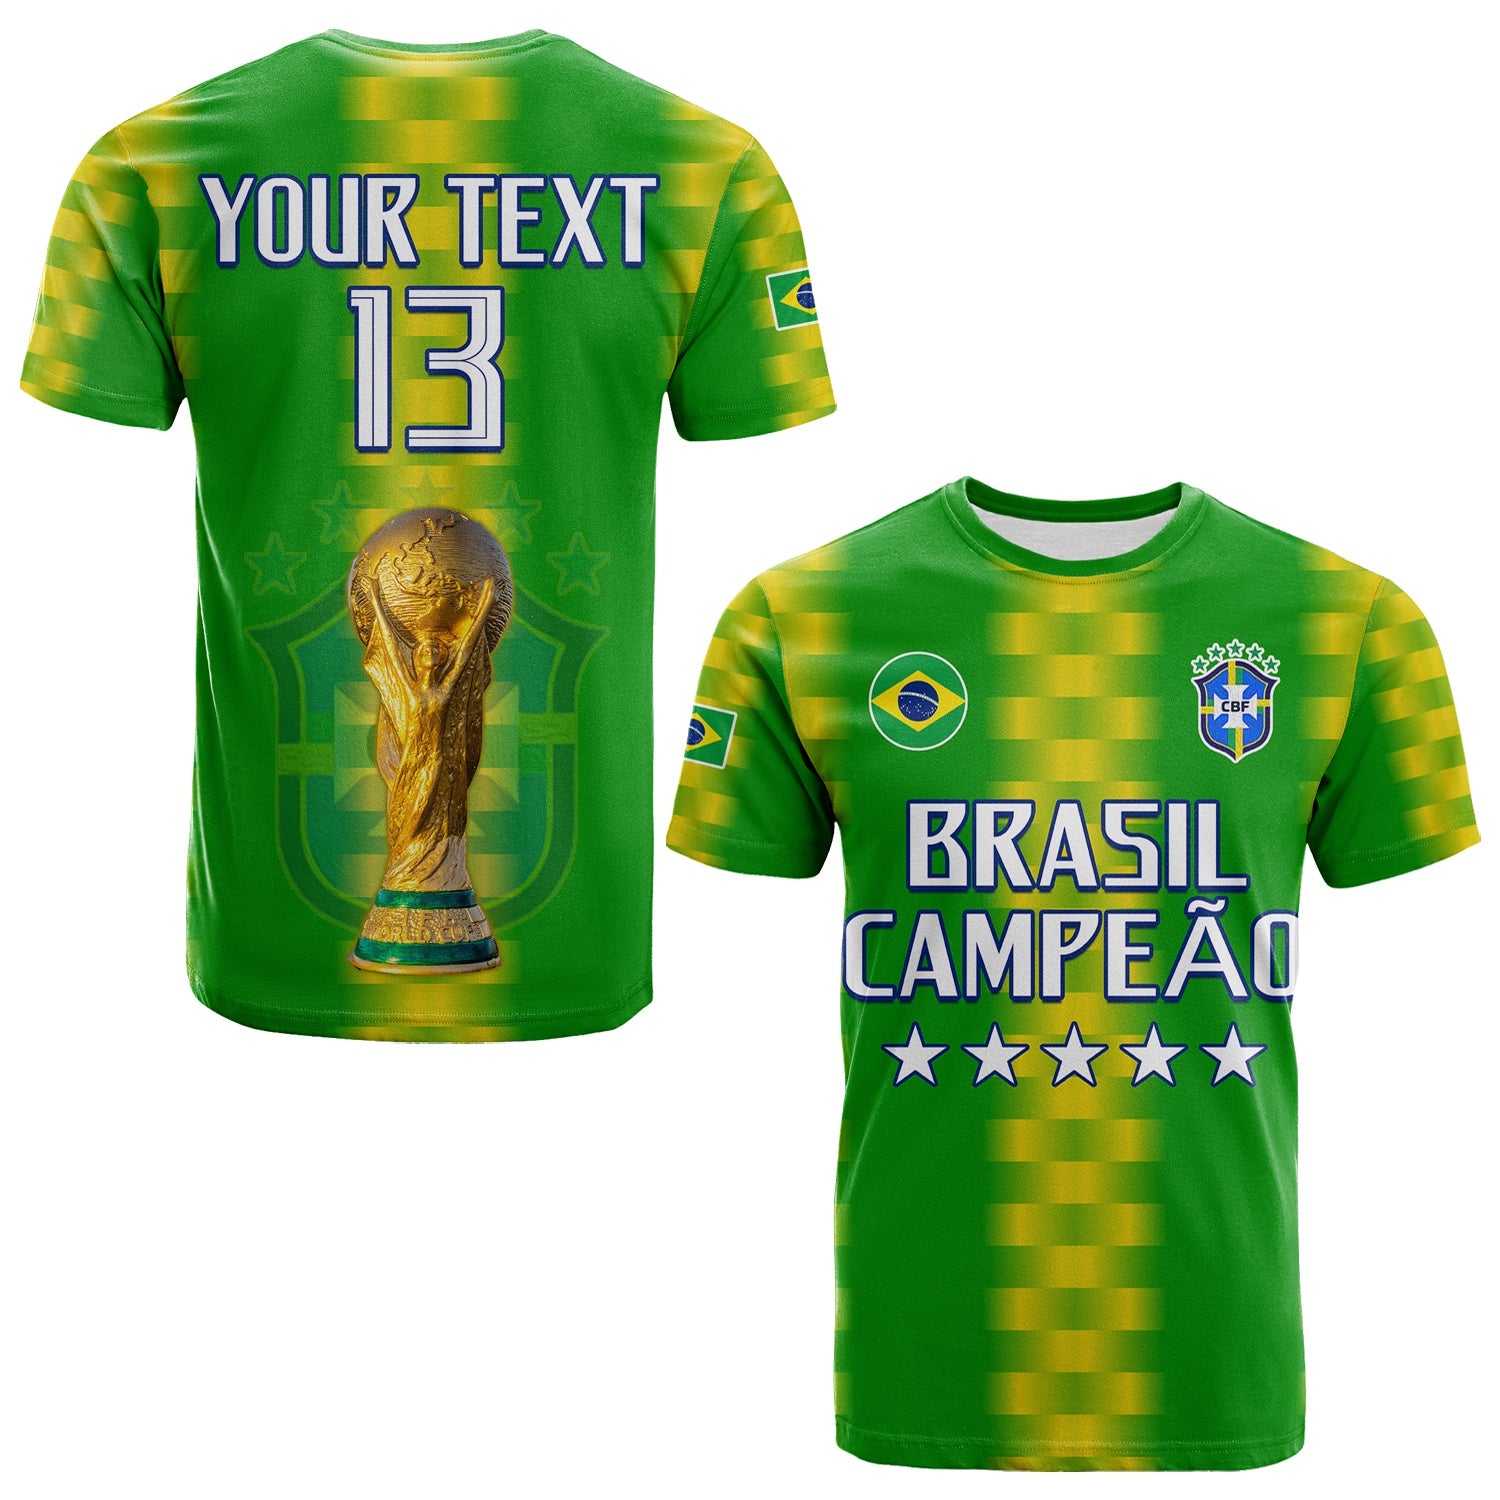 custom-text-and-number-brazil-football-champions-t-shirt-proud-selecao